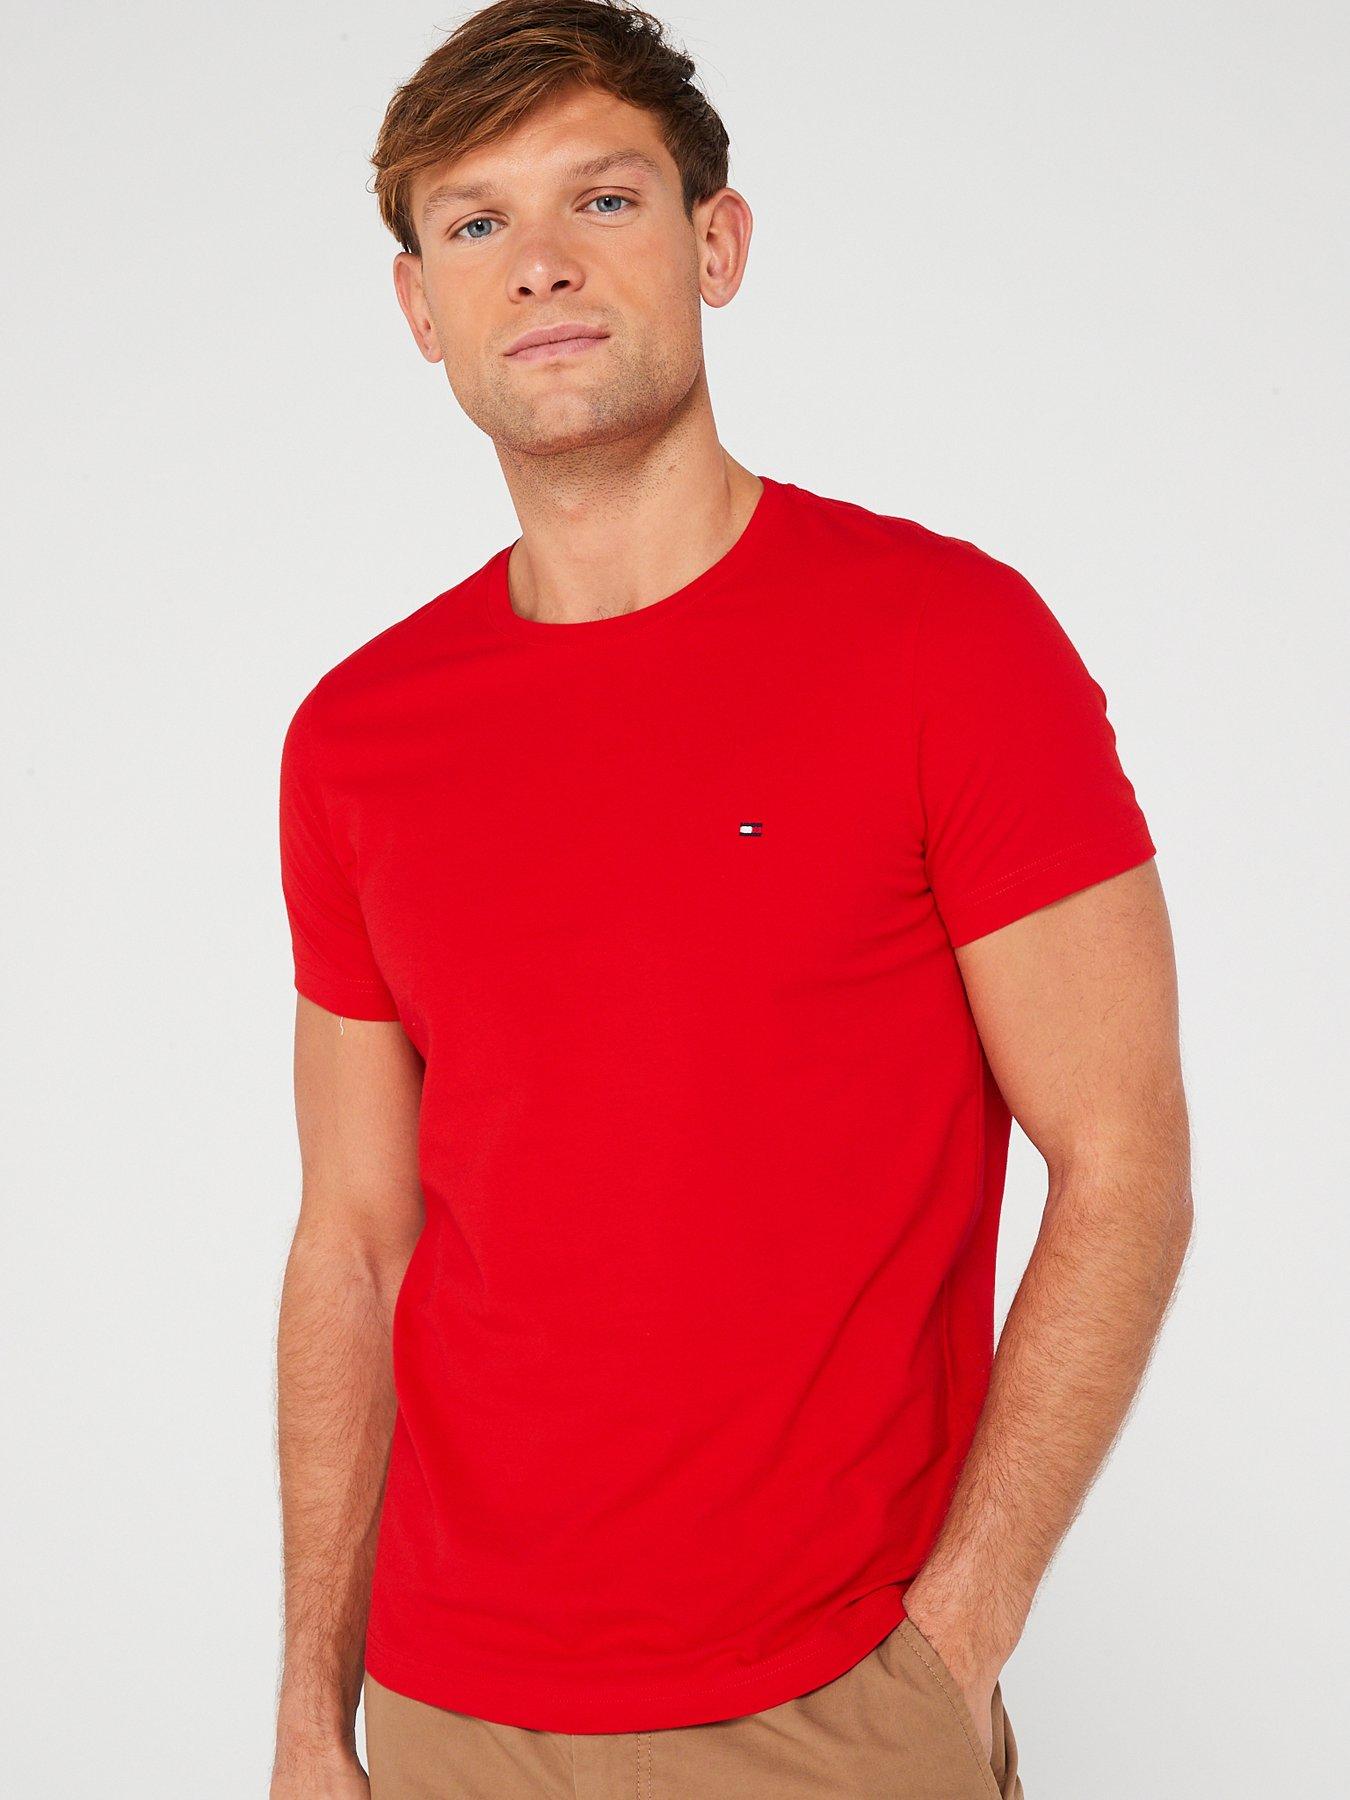 | | Men hilfiger Tommy Red T-shirts | Ireland | & Very polos